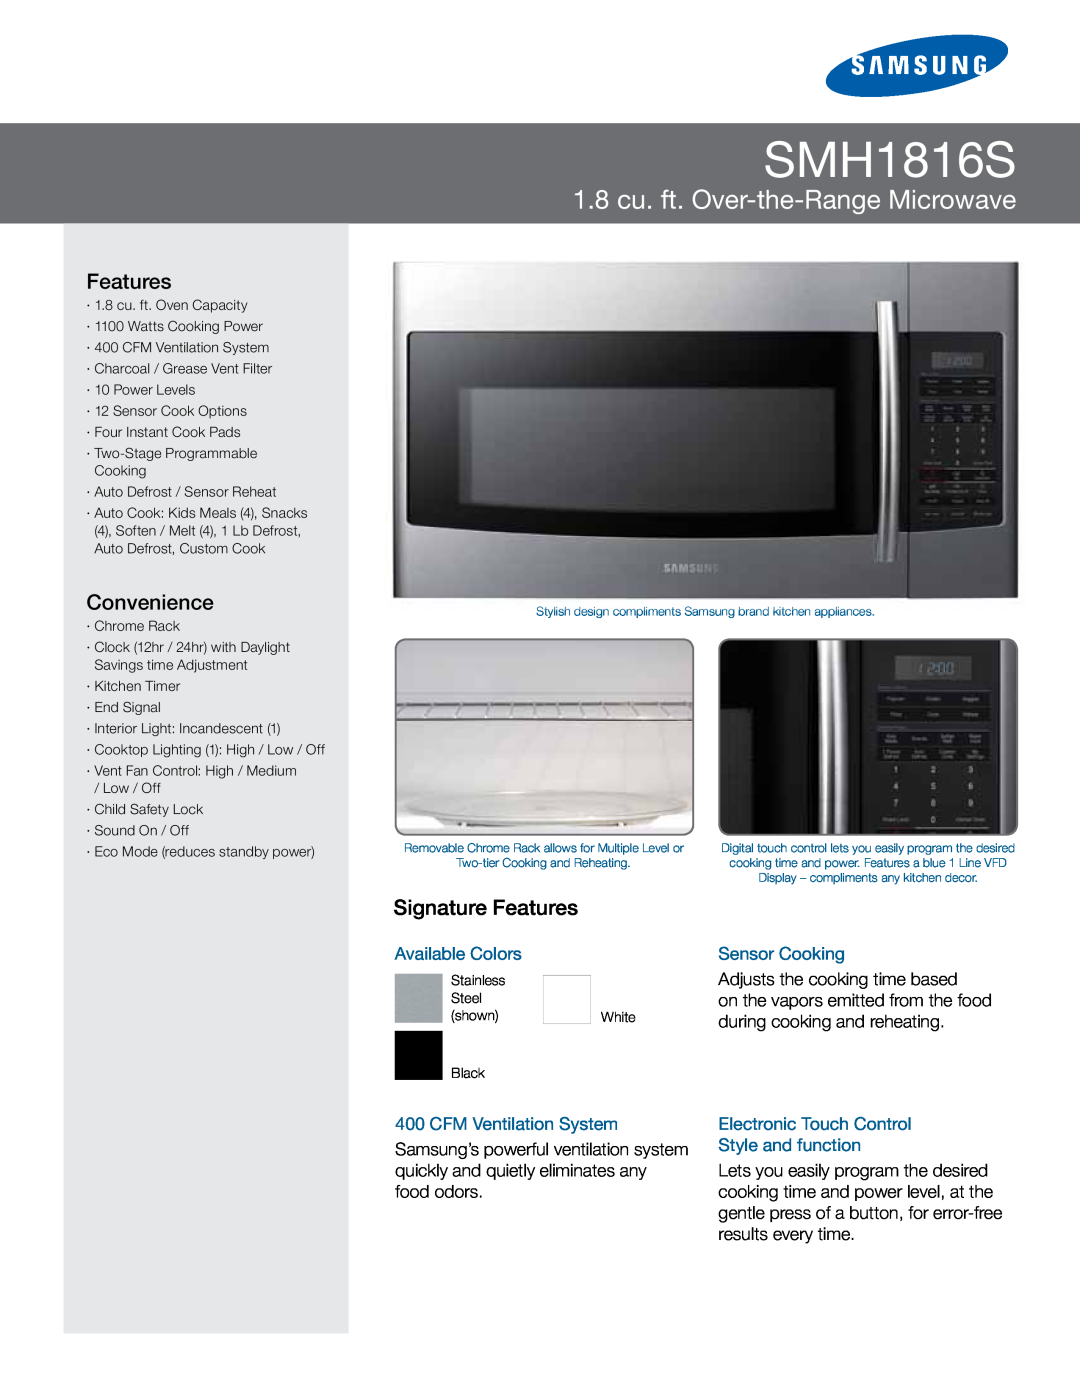 Samsung SMH1816S manual 1.8 cu. ft. Over-the-RangeMicrowave, Convenience, Signature Features, Available Colors 